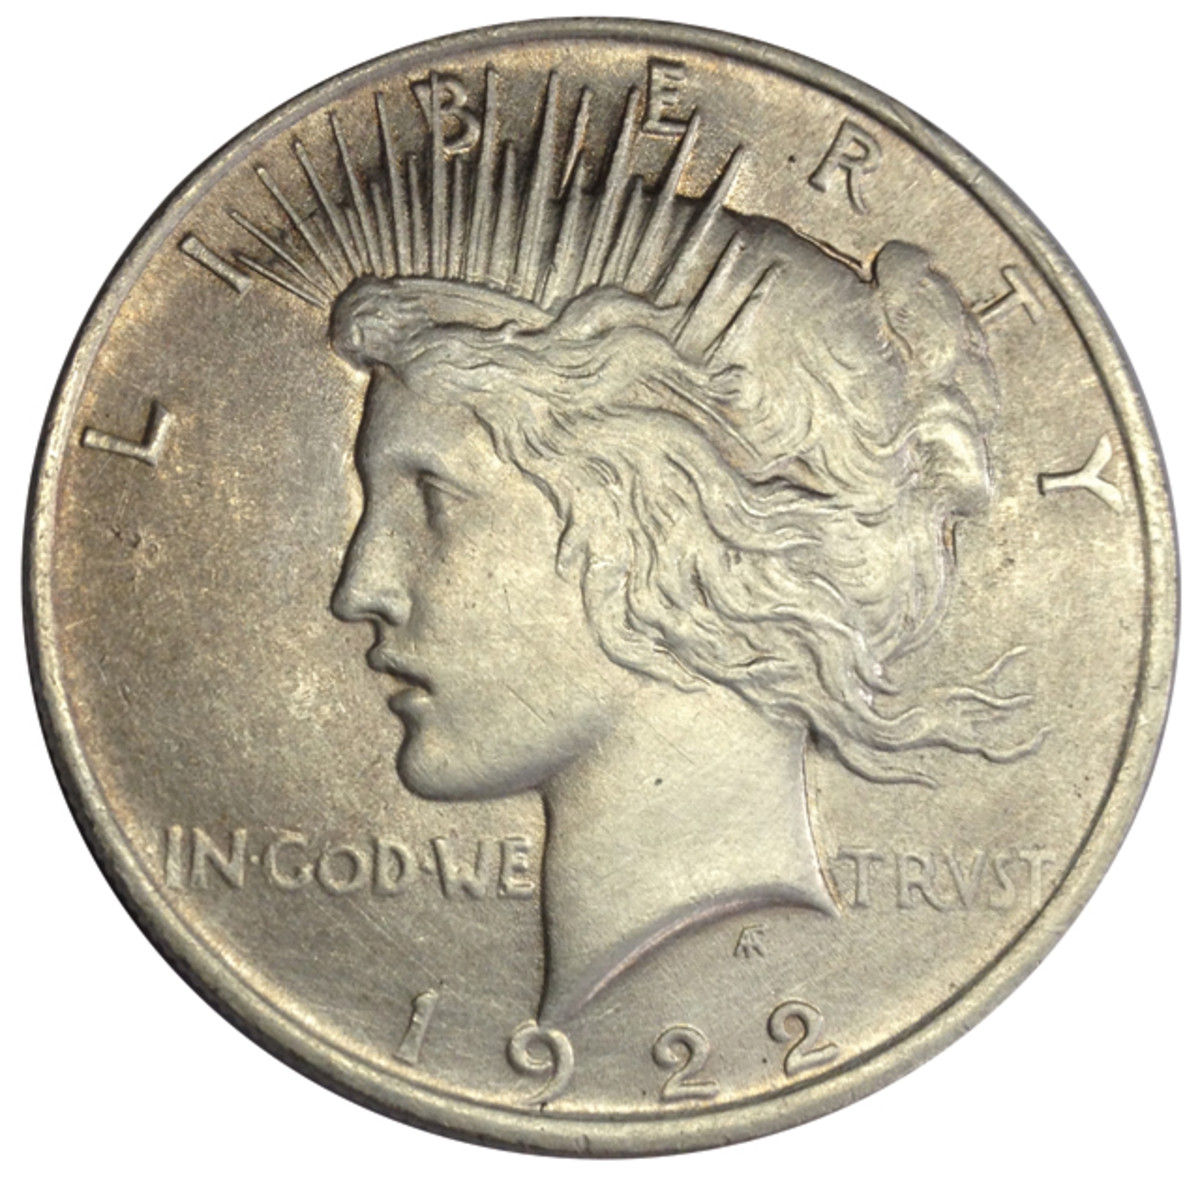 A 1922 Peace dollar appears to have little to no wear or damage at first glance.